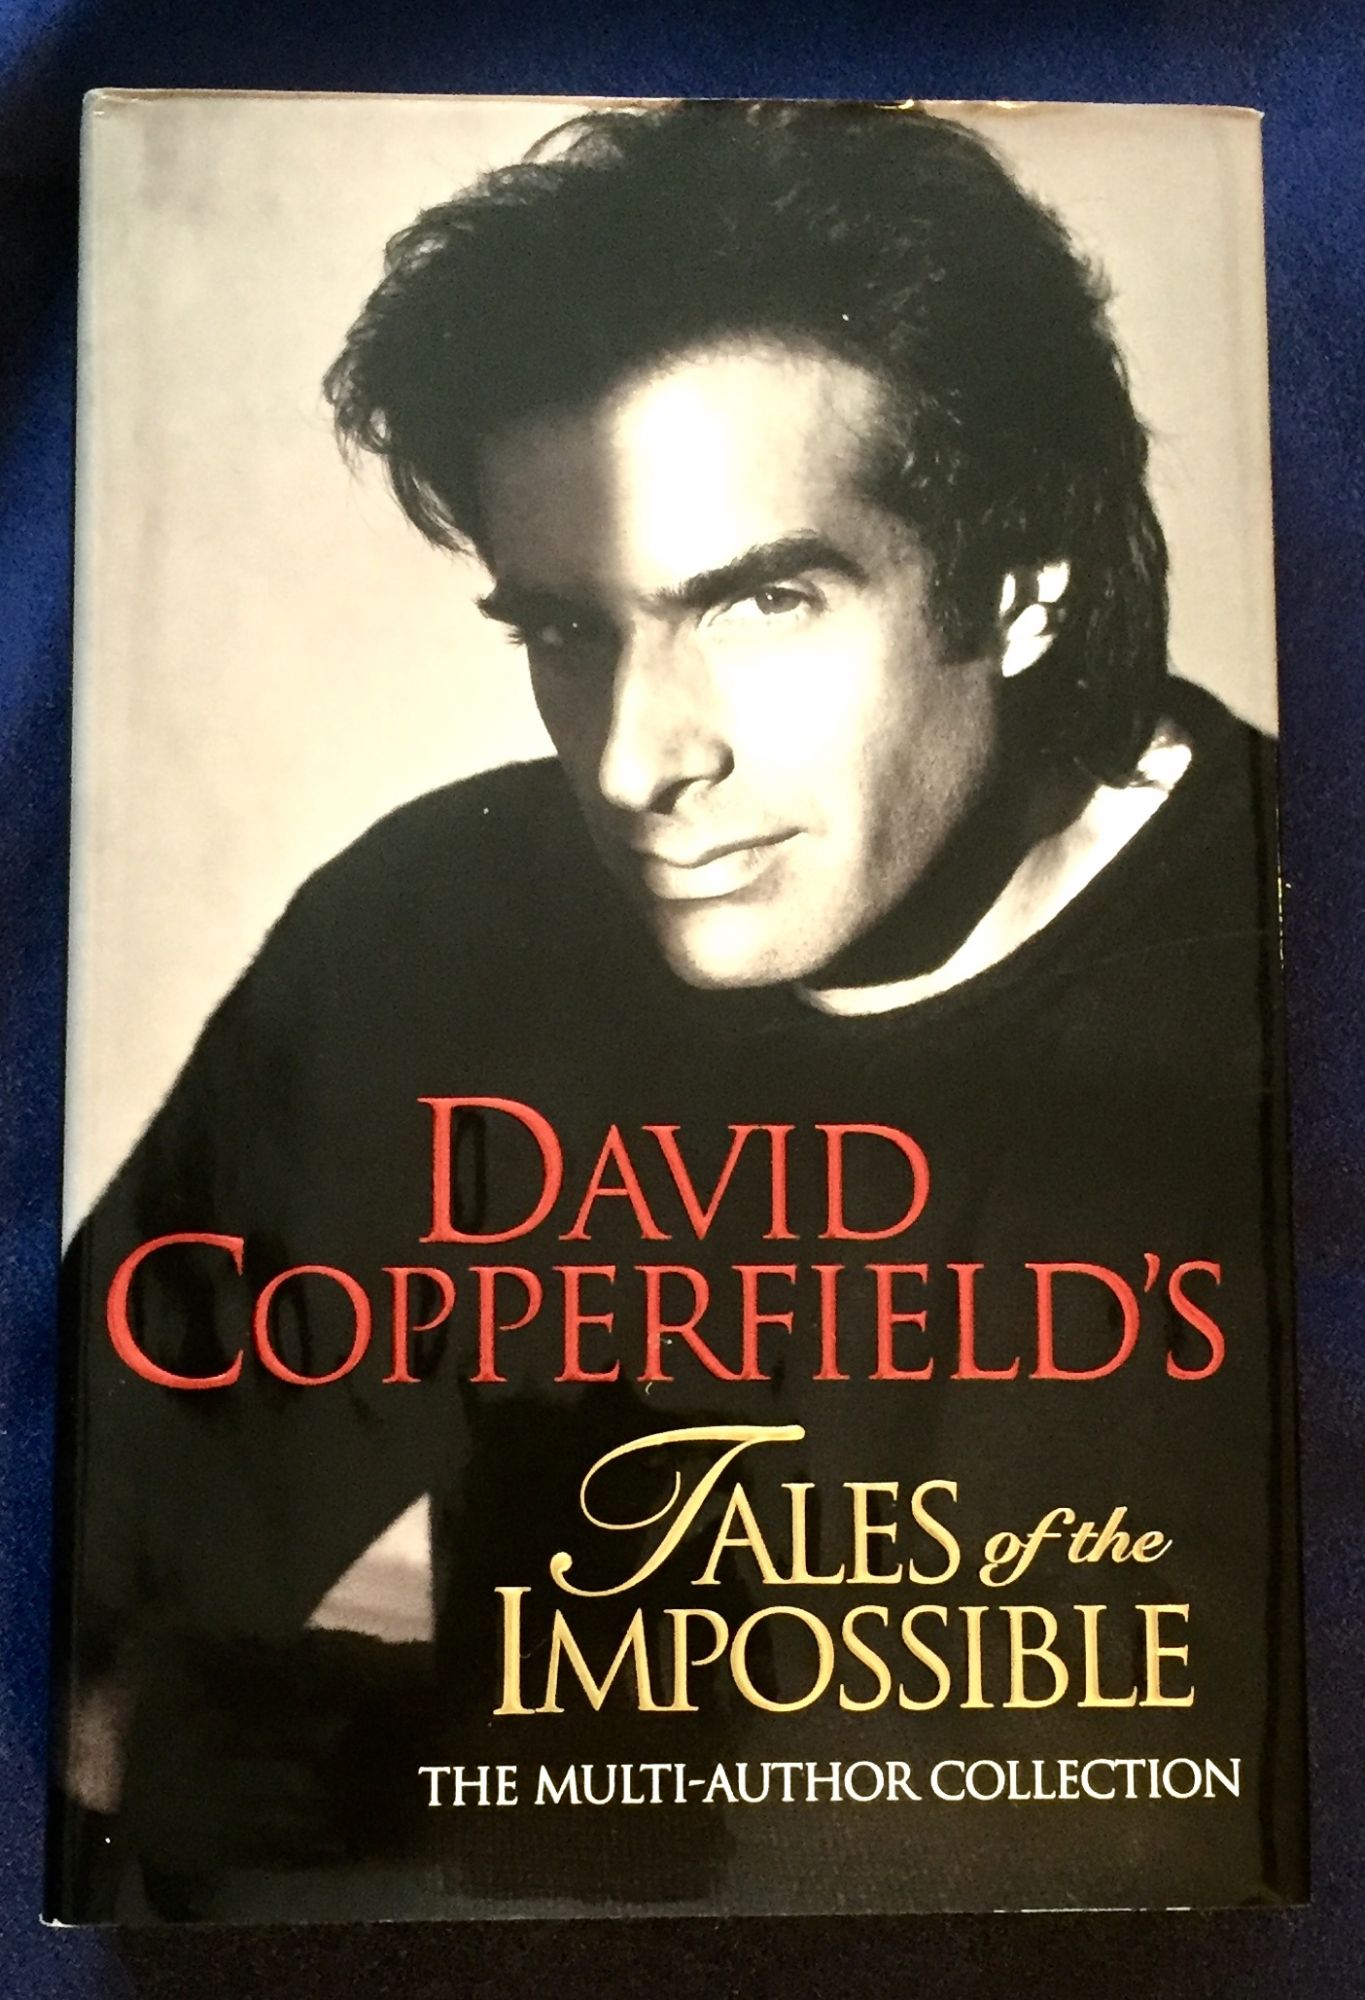 DAVID COPPERFIELD--TALES OF THE IMPOSSIBLE